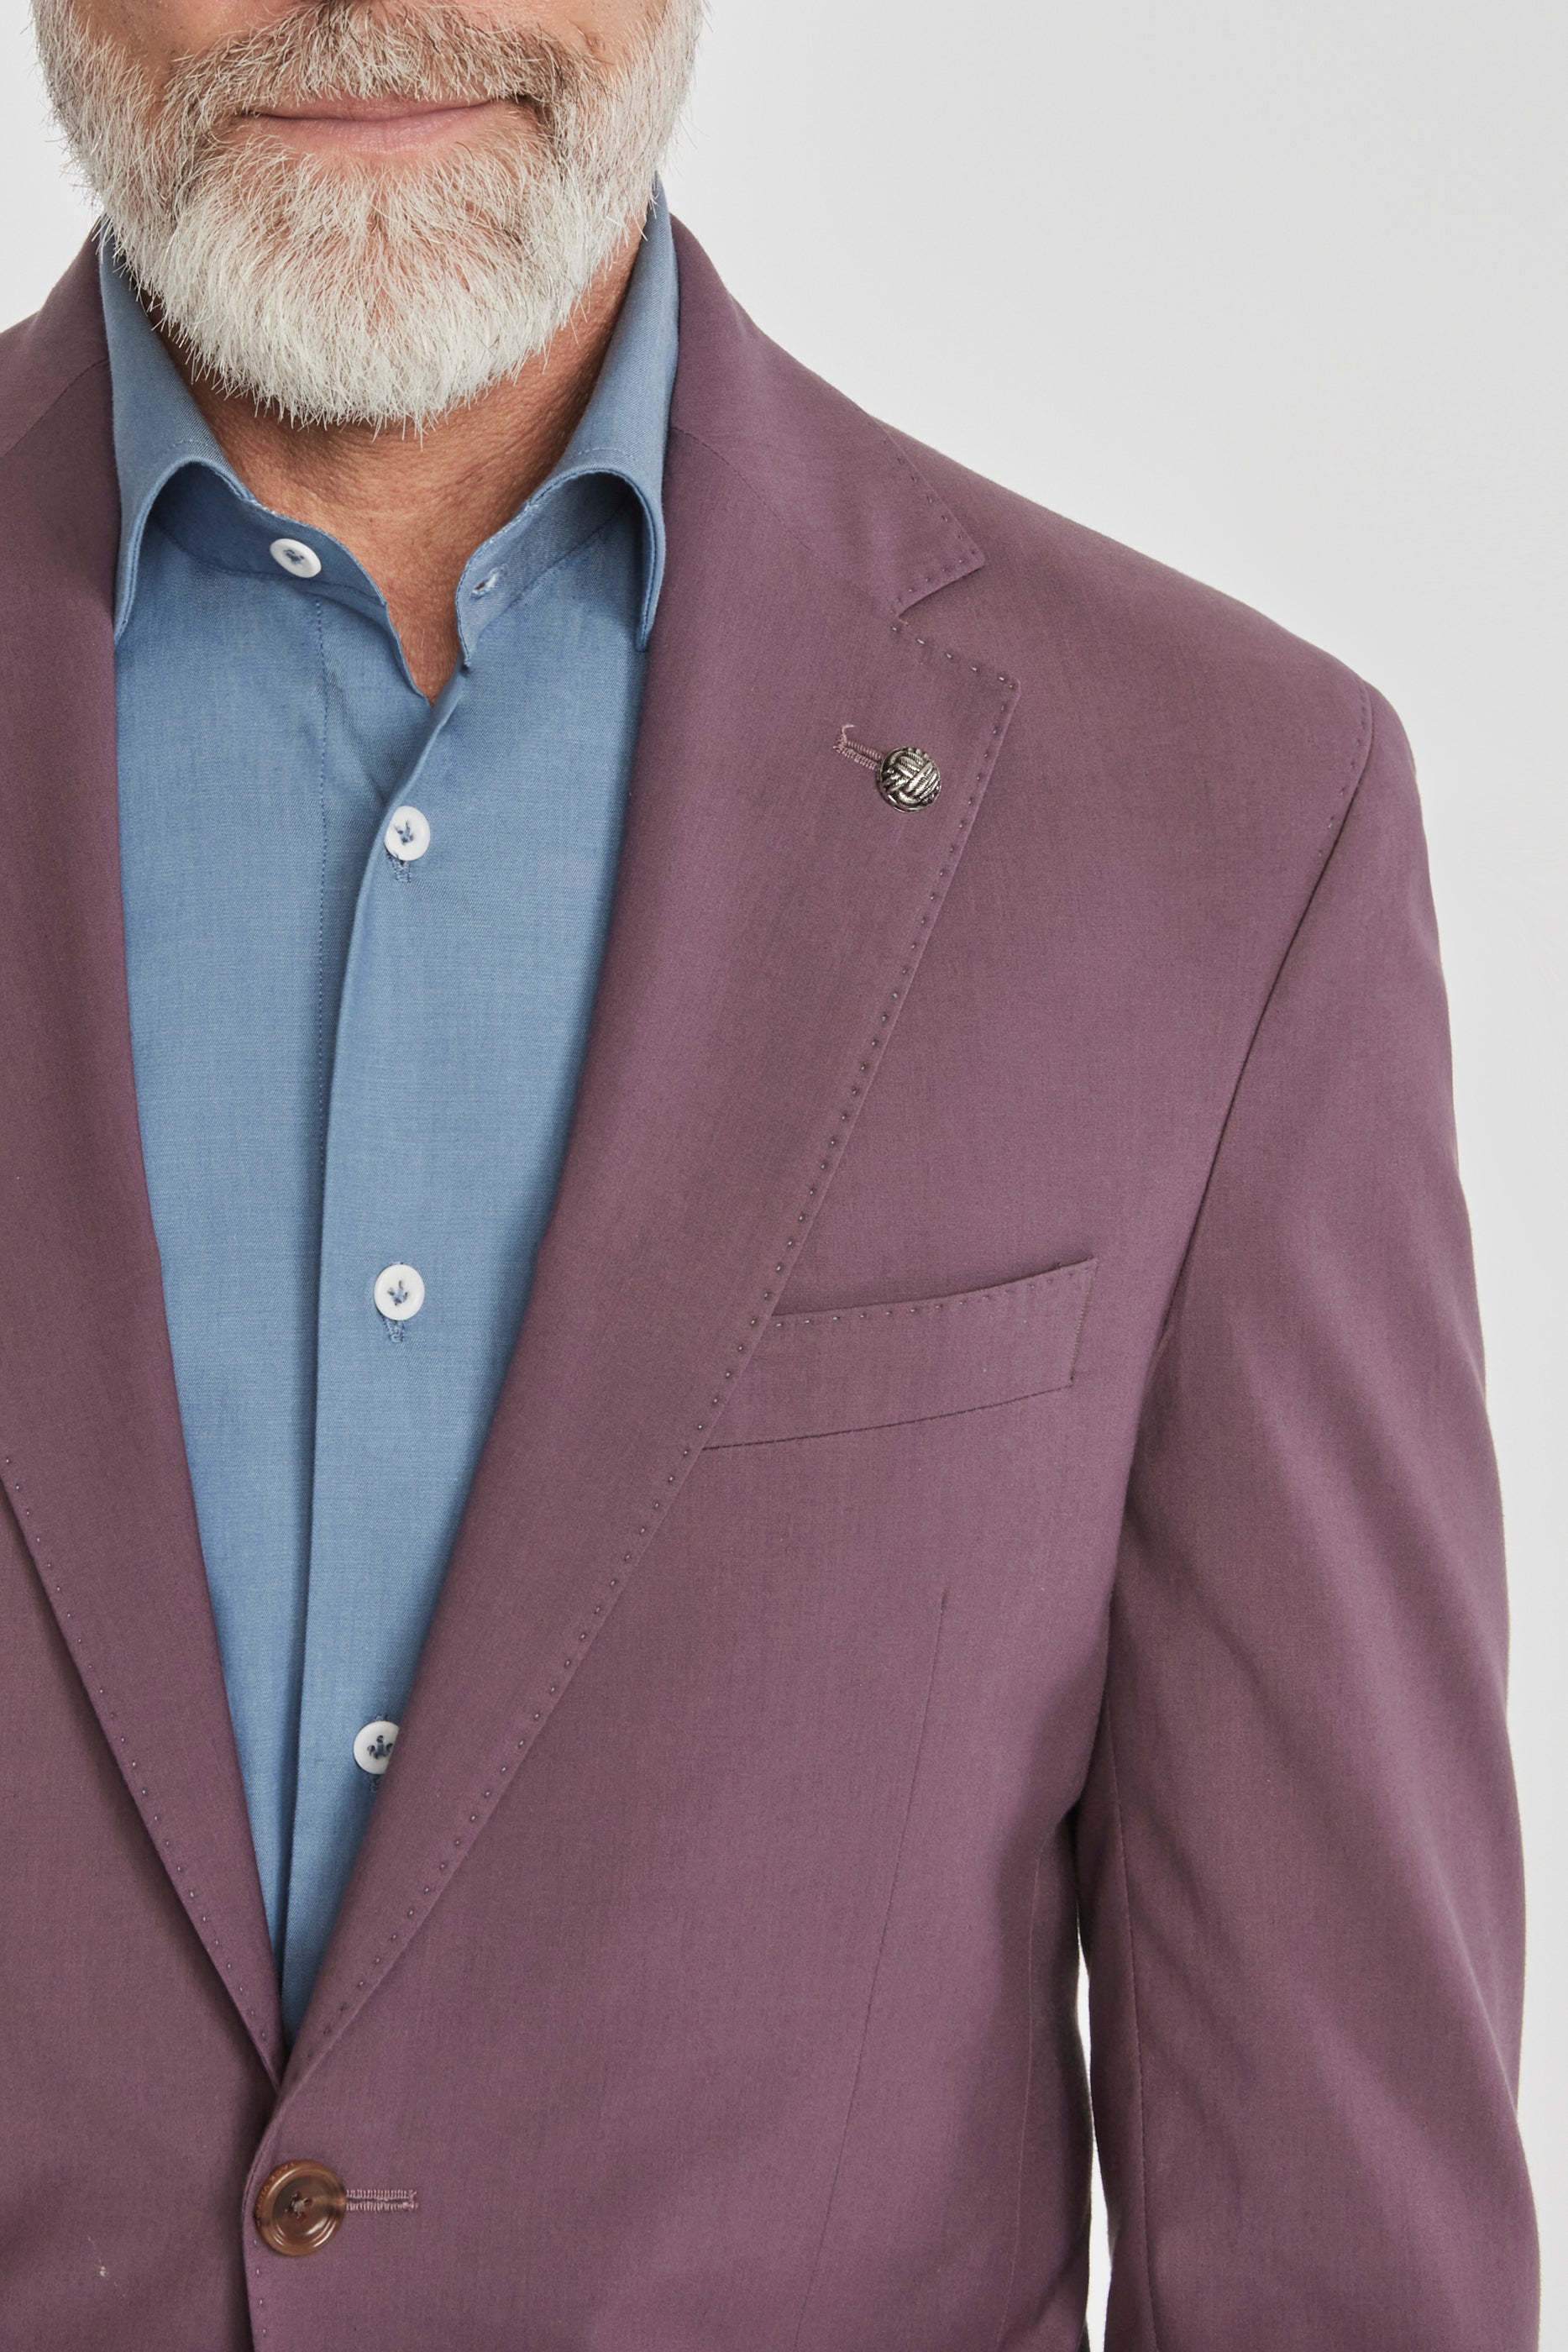 Alt view 2 Midland Solid Wool Cotton Stretch Suit in Berry